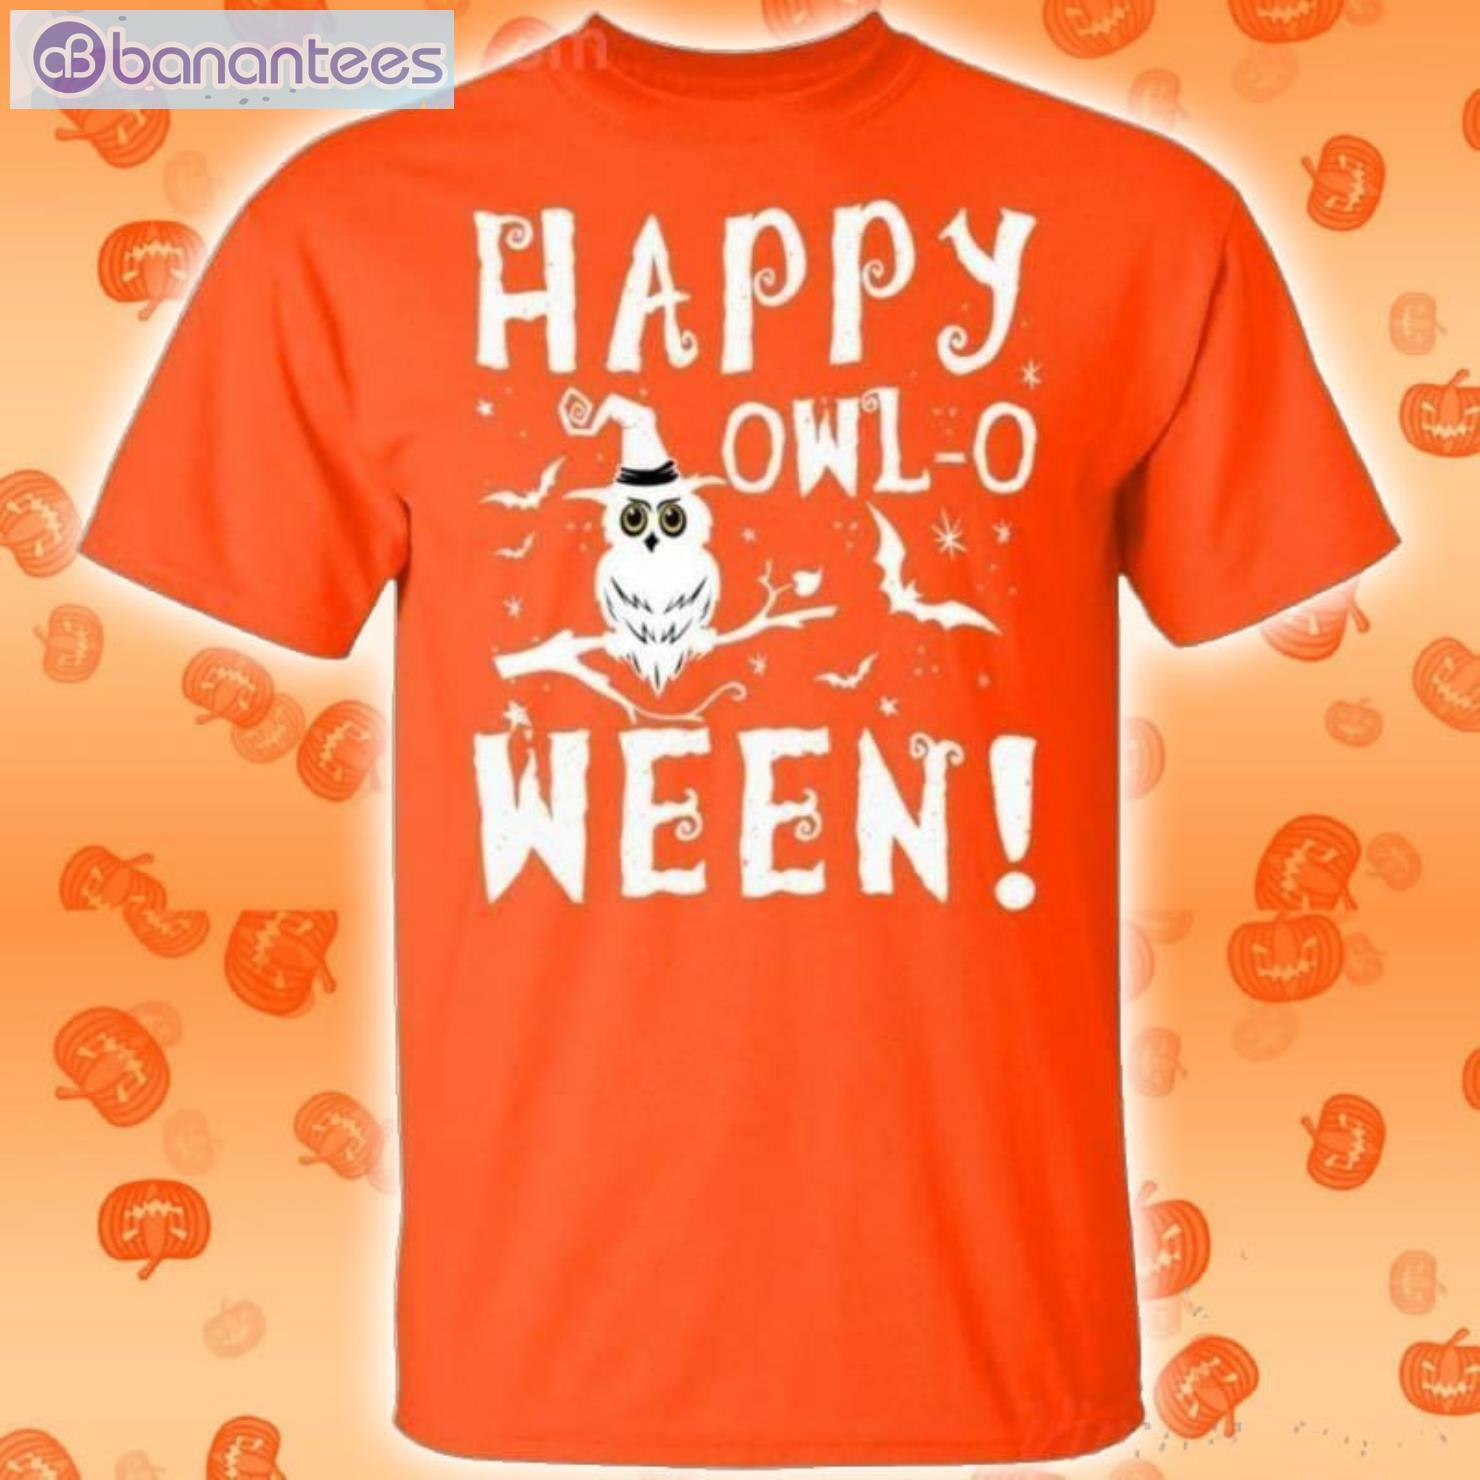 Happy Owl-O-Ween-Funny Owl Halloween T-Shirt Product Photo 2 Product photo 2